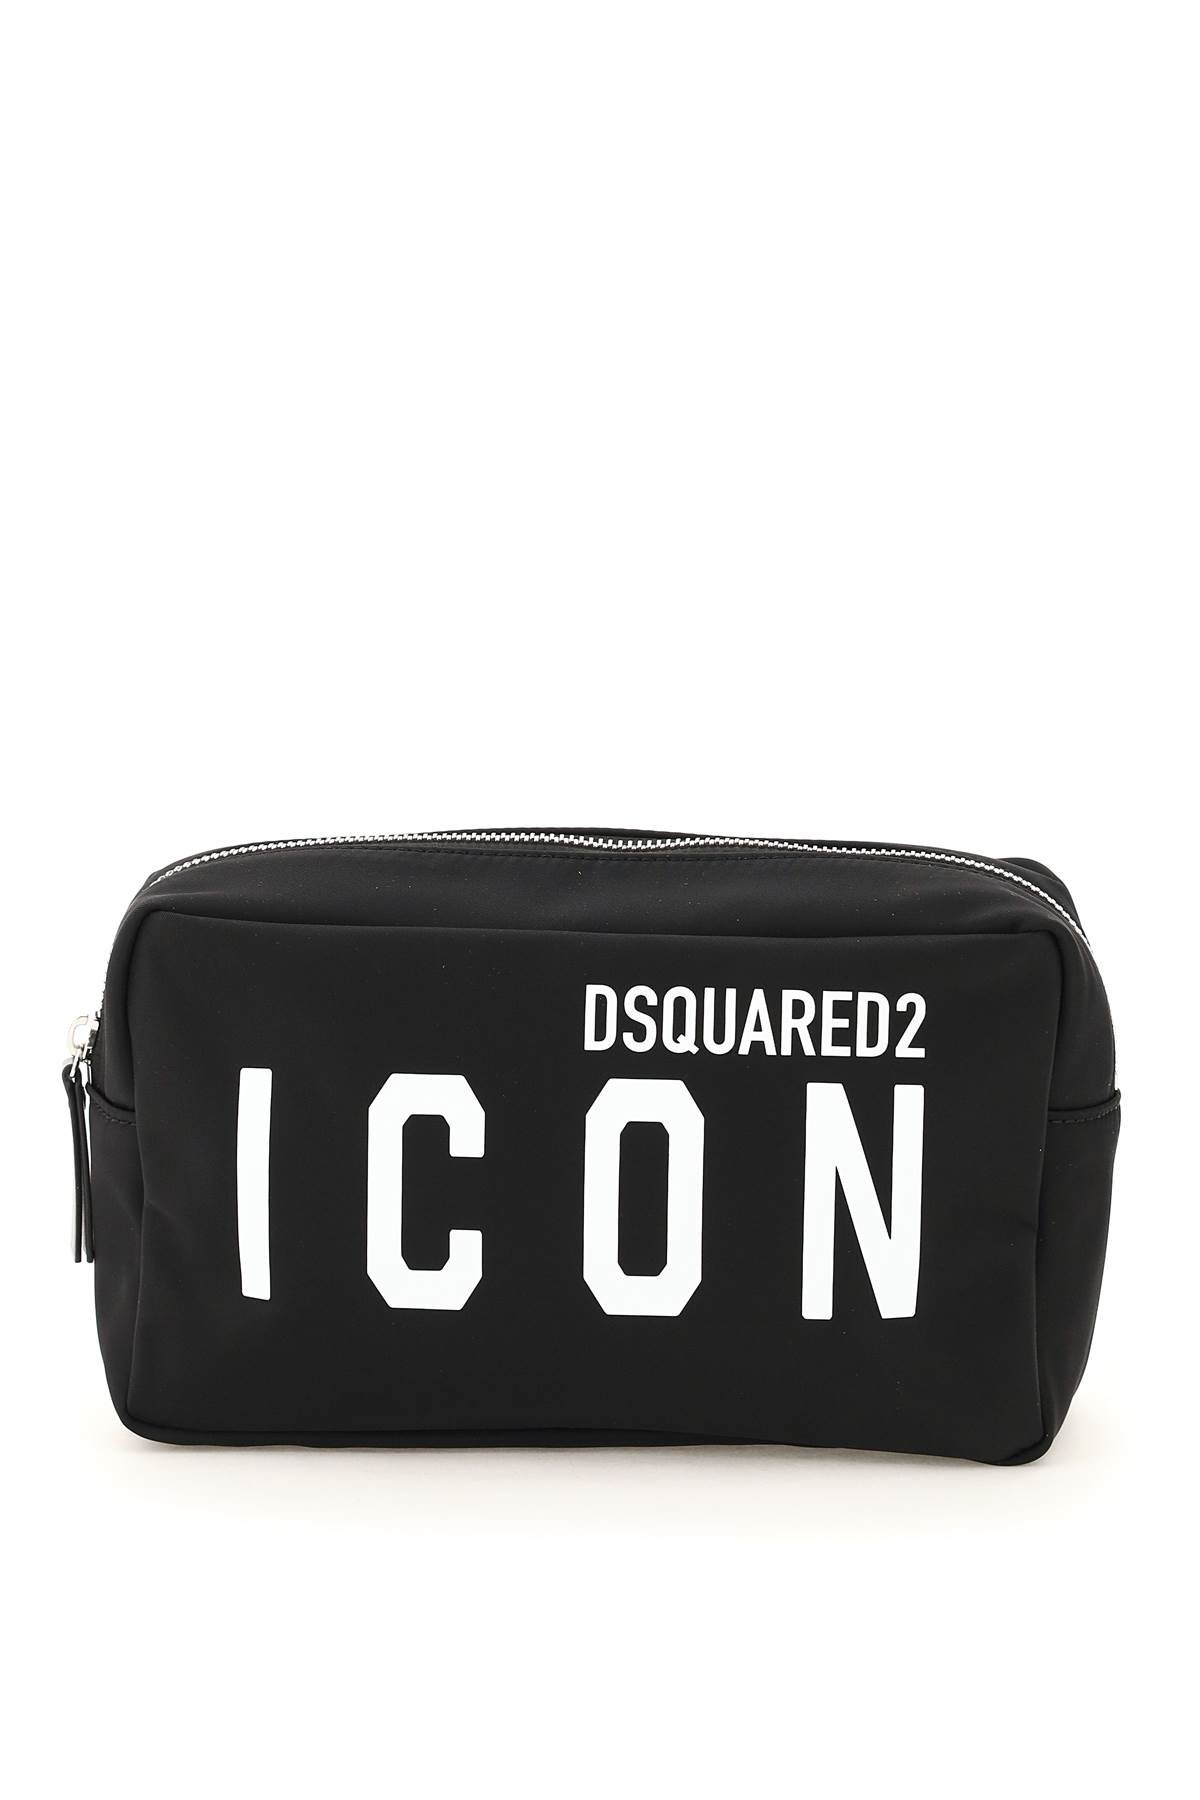 Dsquared2 Icon Beauty Case